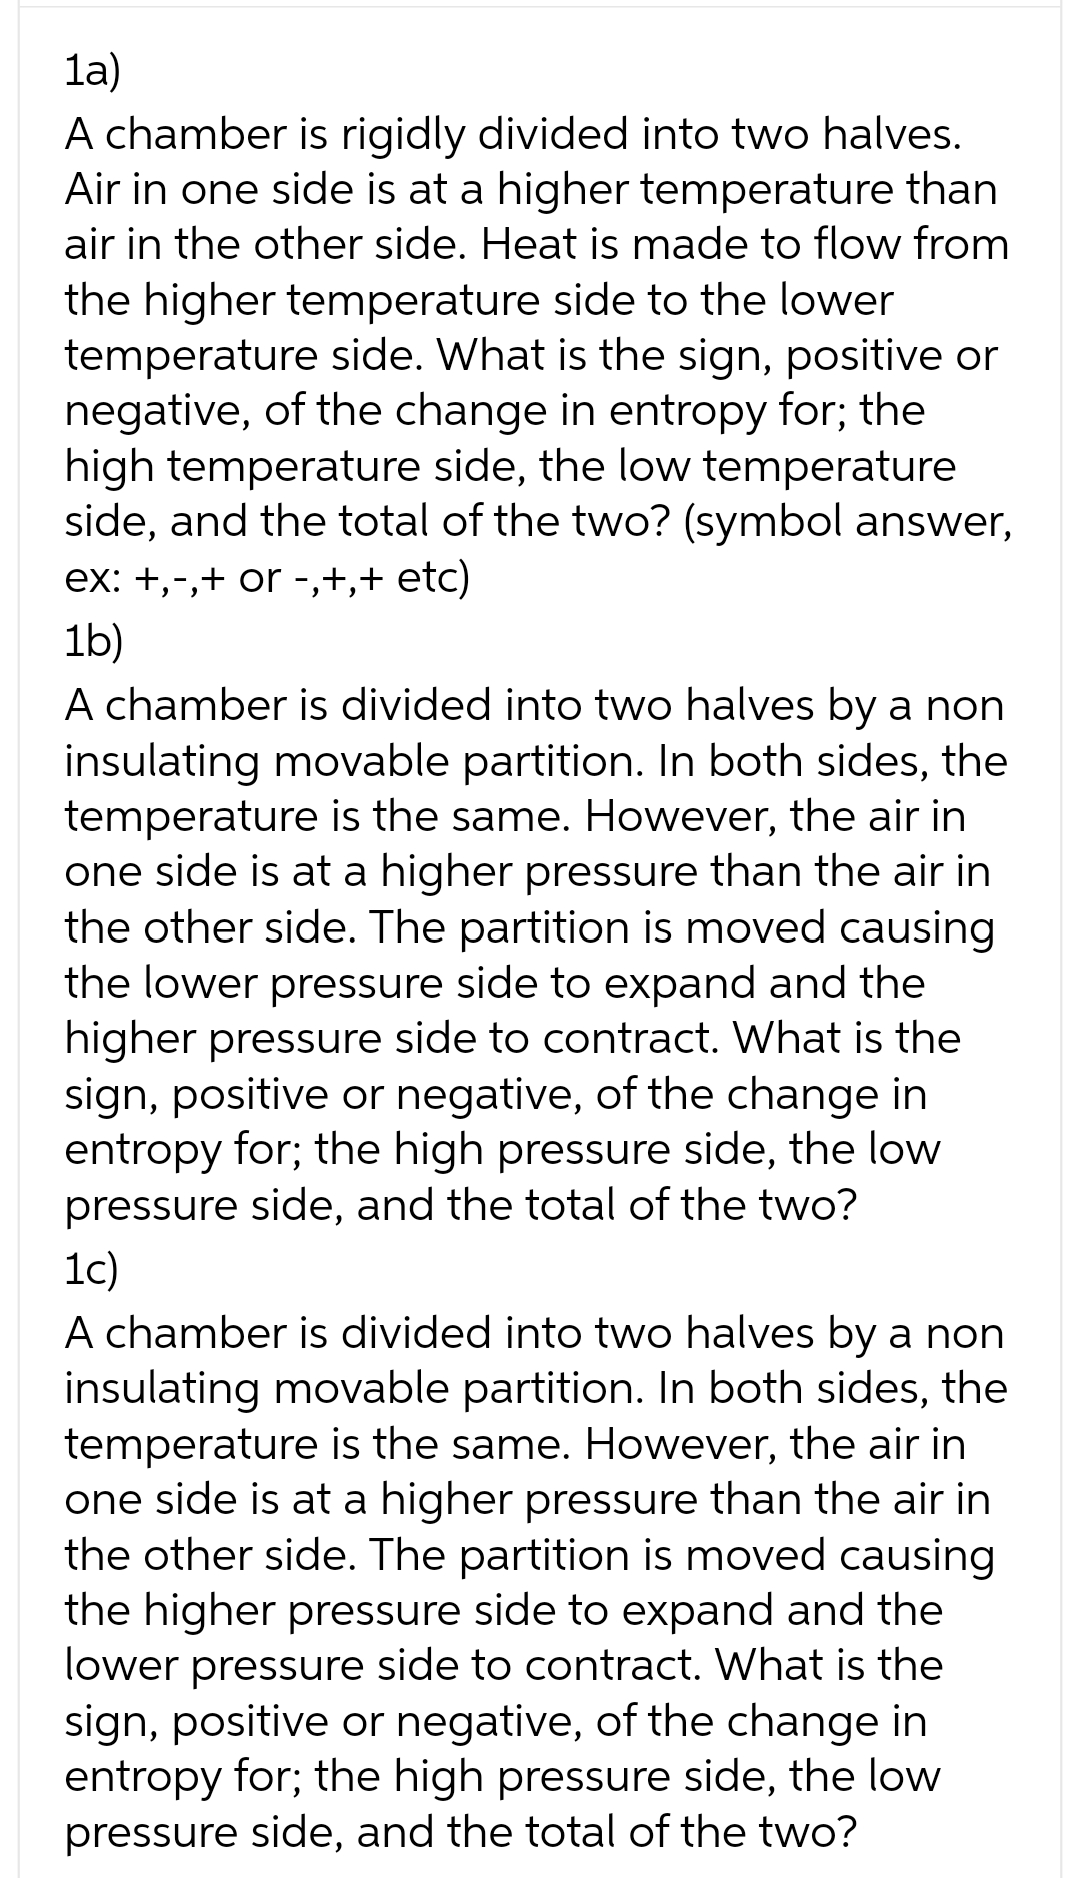 1a)
A chamber is rigidly divided into two halves.
Air in one side is at a higher temperature than
air in the other side. Heat is made to flow from
the higher temperature side to the lower
temperature side. What is the sign, positive or
negative, of the change in entropy for; the
high temperature side, the low temperature
side, and the total of the two? (symbol answer,
ex: +,-,+ or -,+,+ etc)
1b)
A chamber is divided into two halves by a non
insulating movable partition. In both sides, the
temperature is the same. However, the air in
one side is at a higher pressure than the air in
the other side. The partition is moved causing
the lower pressure side to expand and the
higher pressure side to contract. What is the
sign, positive or negative, of the change in
entropy for; the high pressure side, the low
pressure side, and the total of the two?
1c)
A chamber is divided into two halves by a non
insulating movable partition. In both sides, the
temperature is the same. However, the air in
one side is at a higher pressure than the air in
the other side. The partition is moved causing
the higher pressure side to expand and the
lower pressure side to contract. What is the
sign, positive or negative, of the change in
entropy for; the high pressure side, the low
pressure side, and the total of the two?